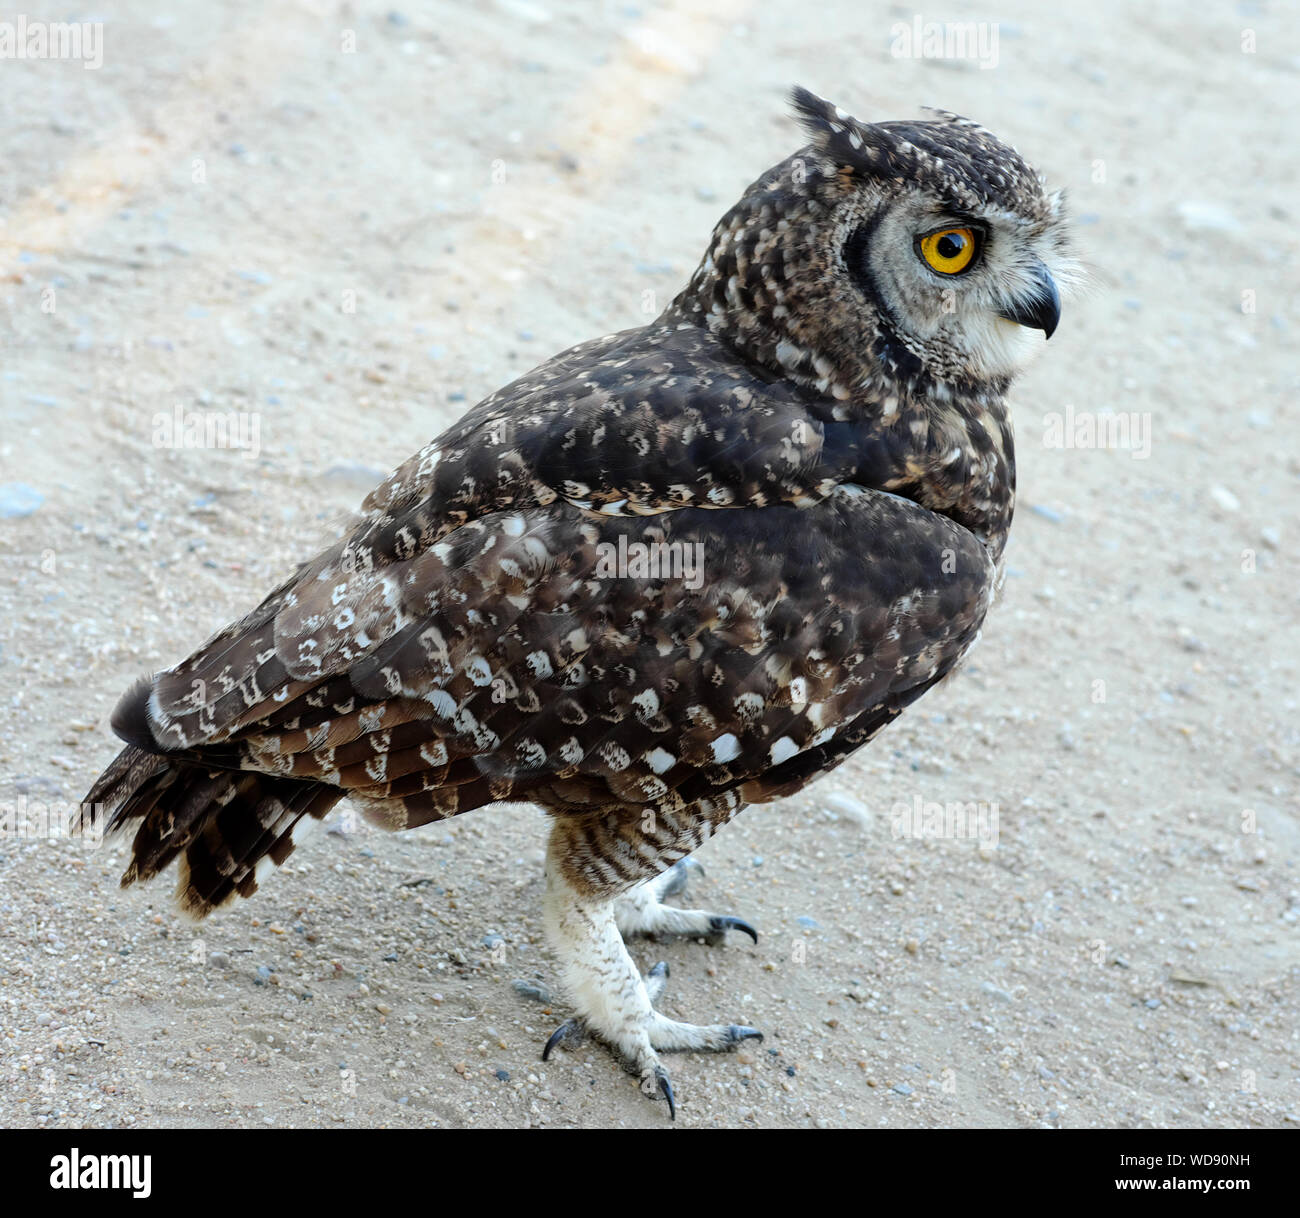 Spotted Eagle Owl at a rehabilitation centre recovering from a injury. Stock Photo